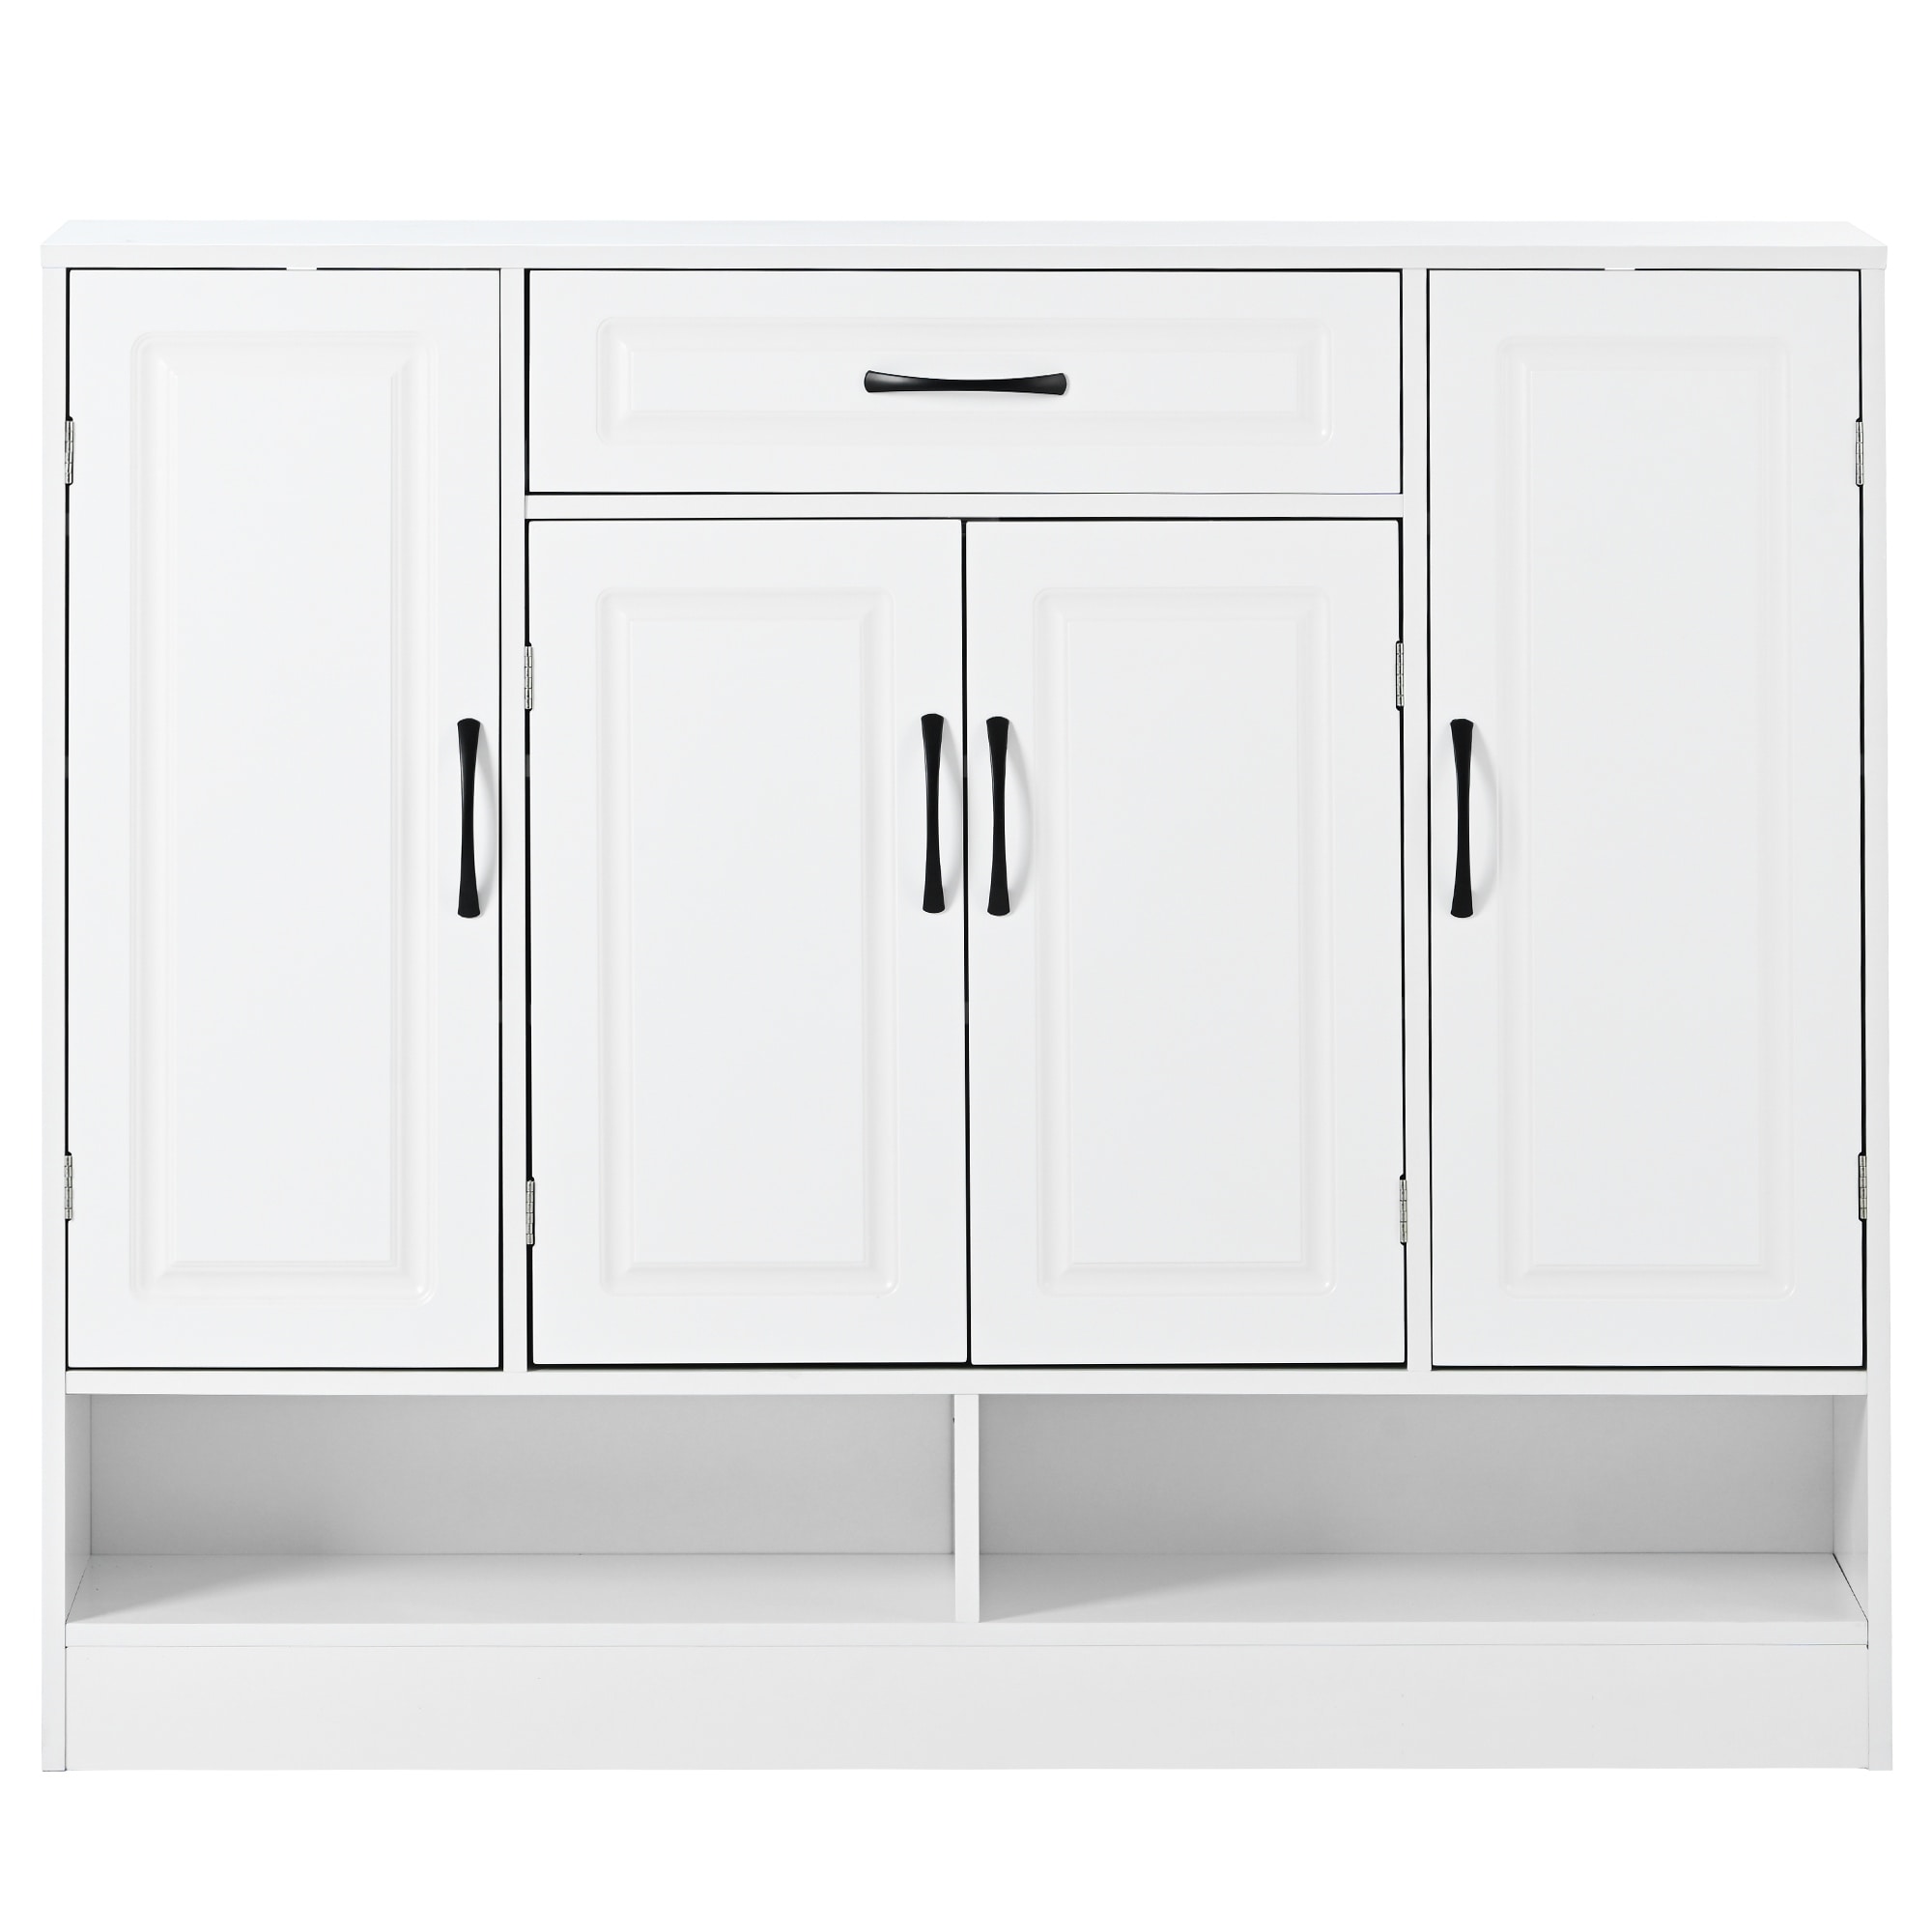 https://ak1.ostkcdn.com/images/products/is/images/direct/199ff132b07691268c02878491d44587ed93470b/Shoe-Cabinet-for-Entryway%2C-Modern-Free-Standing-Shoe-Storage-Cabinets%2C-Shoe-Organizer-Cabinet-with-Adjustable-Shelves.jpg